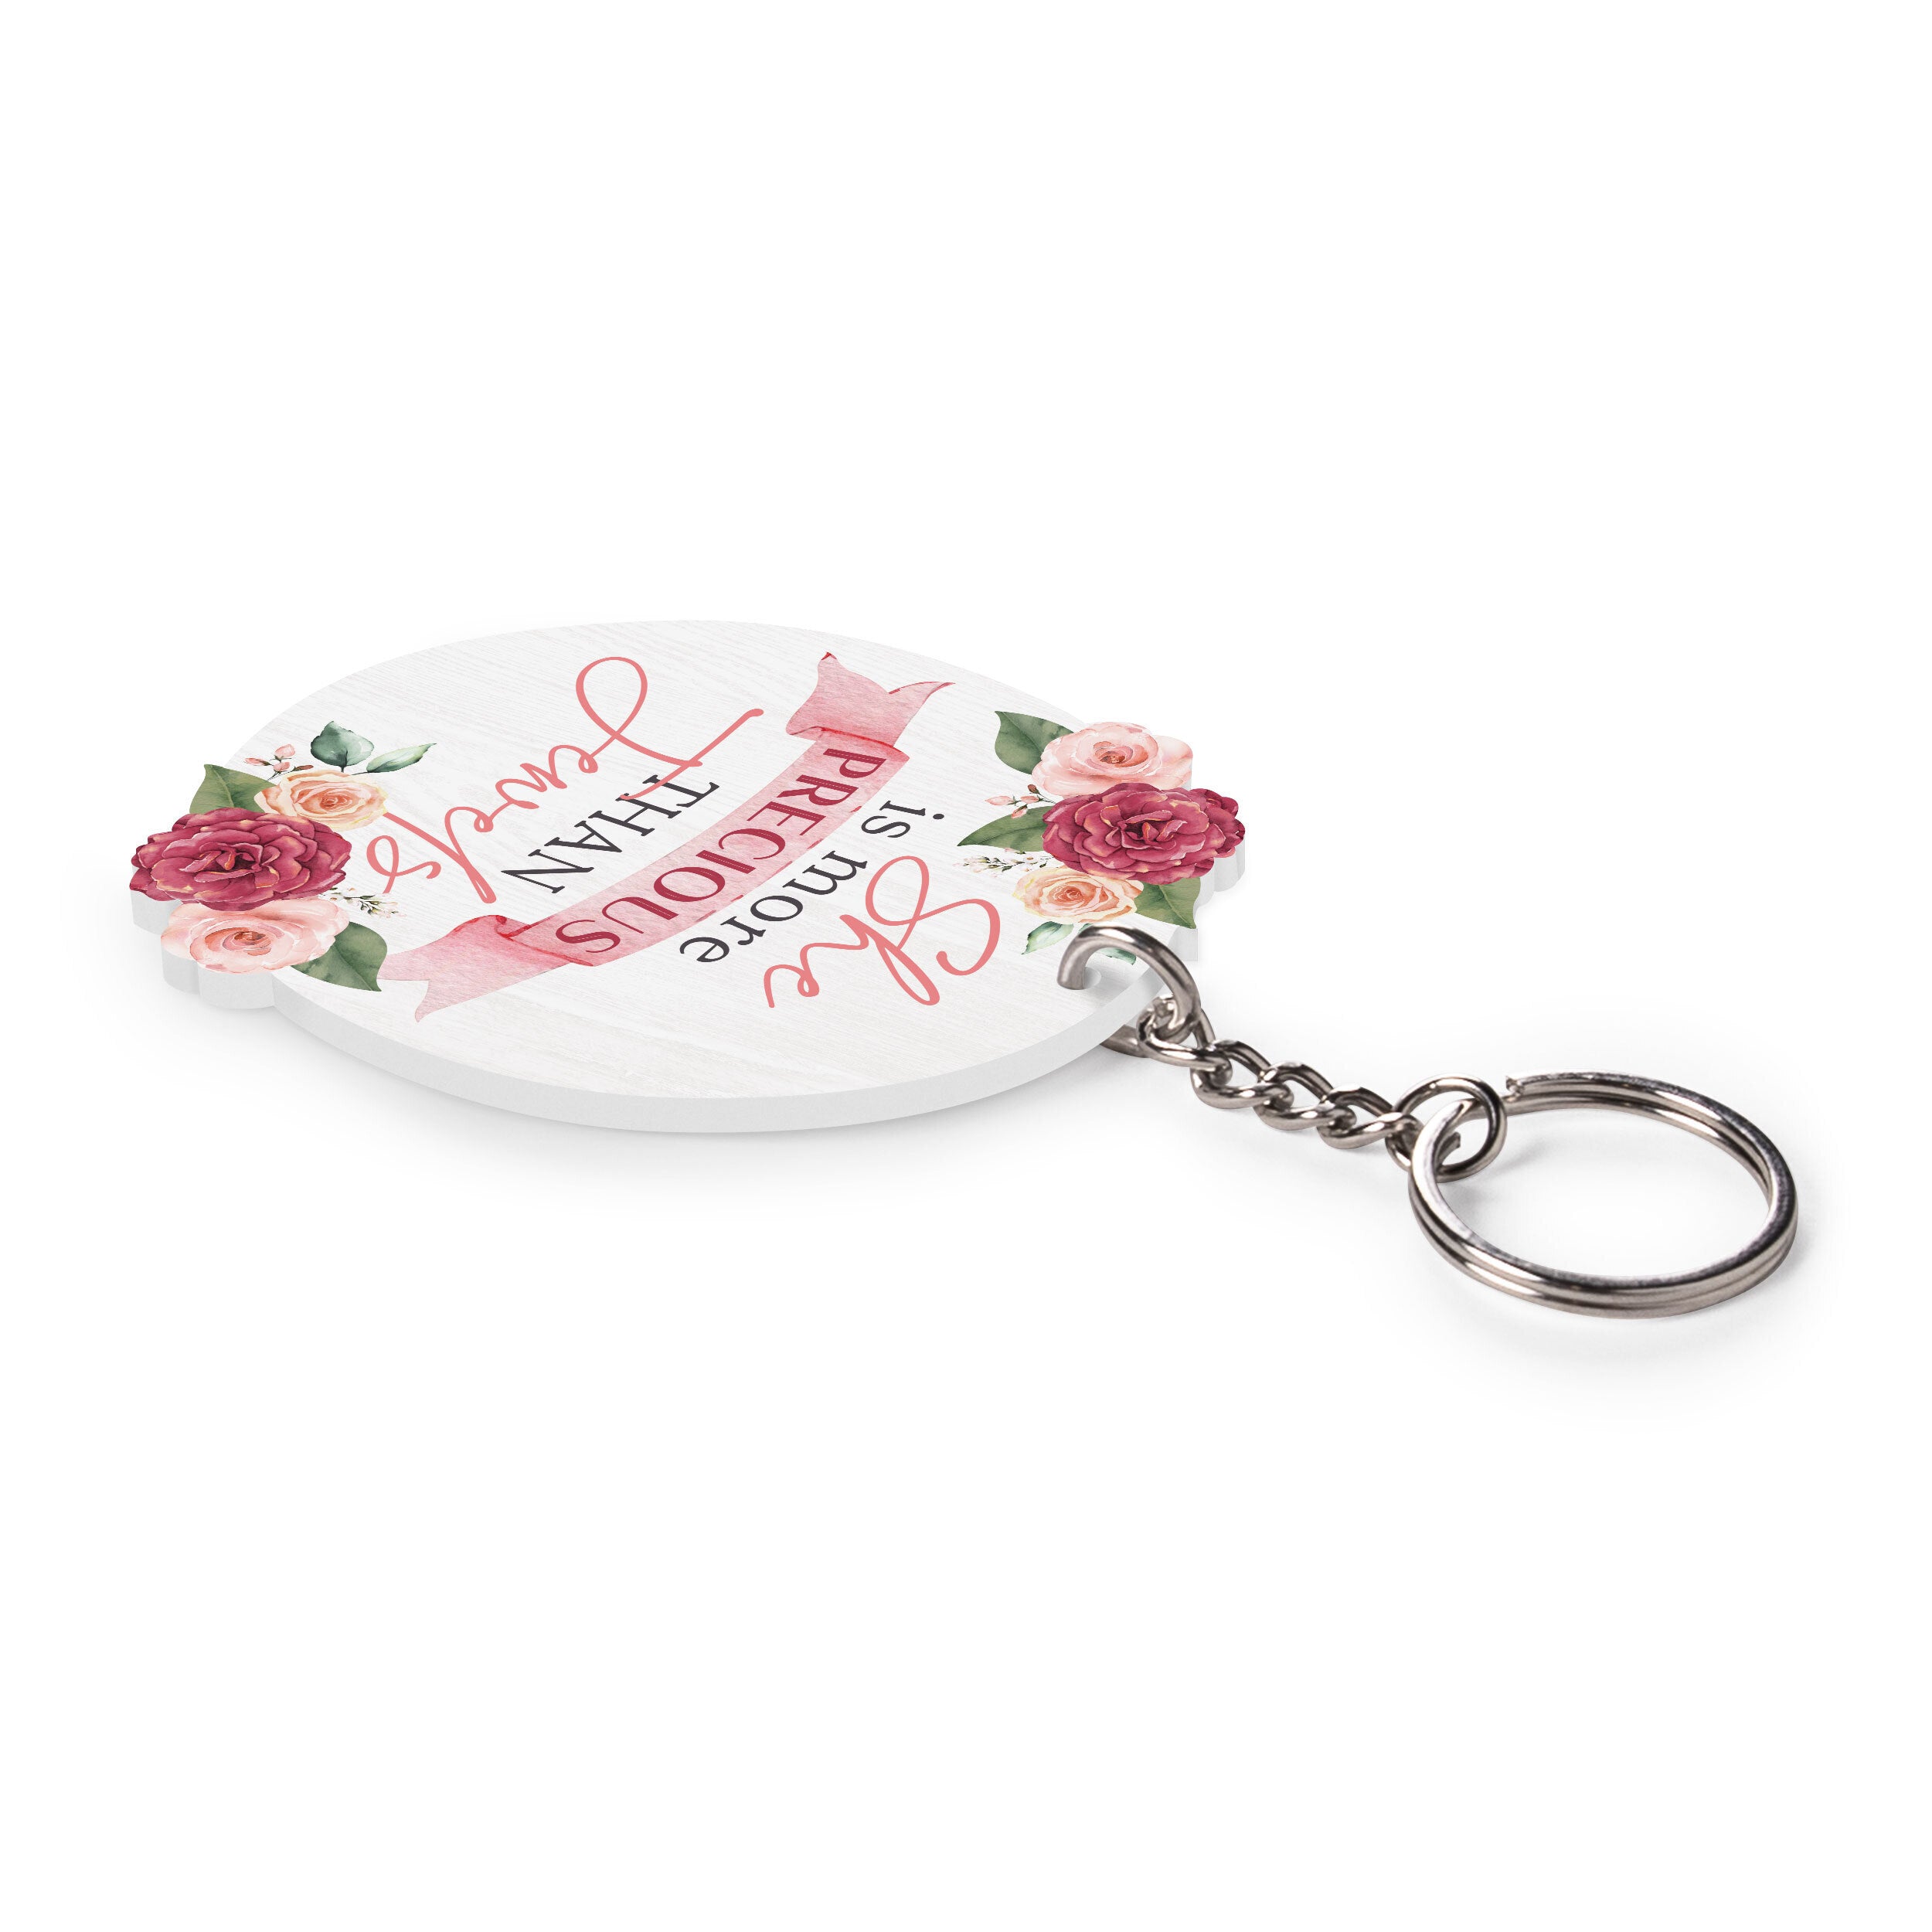 She Is More Precious Than Jewels Acrylic Oval Floral Shape Key Chain